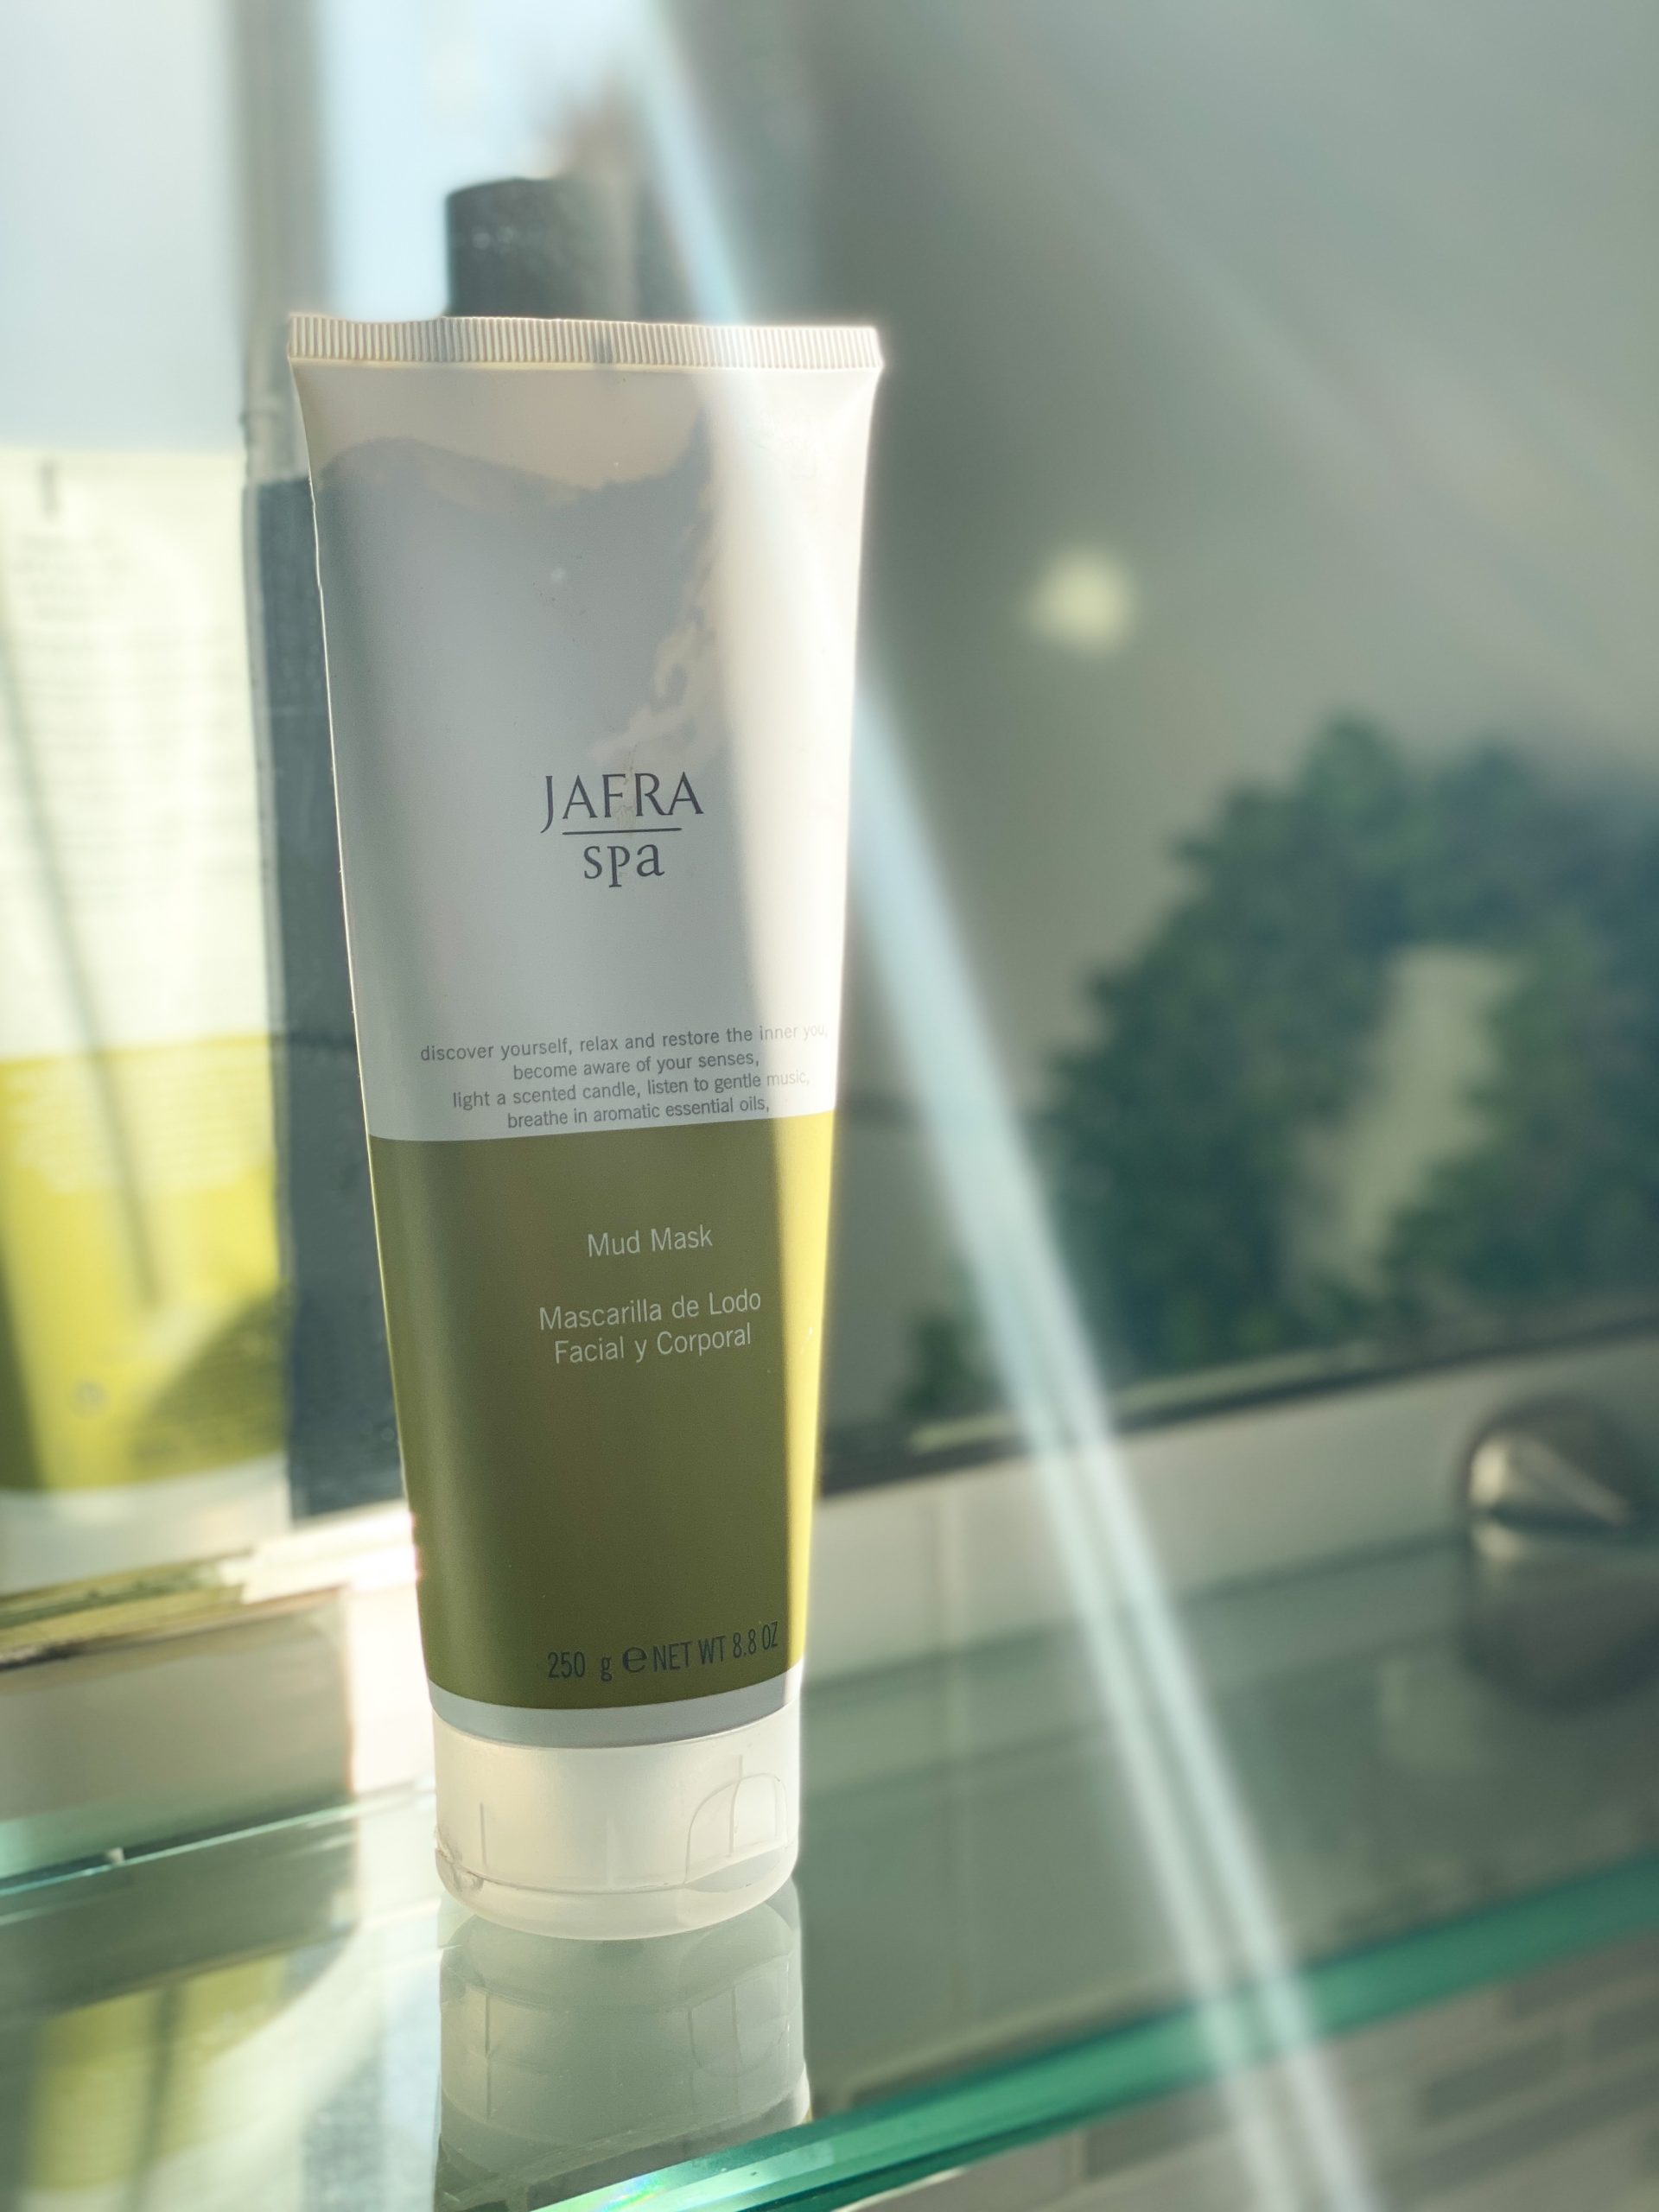 JAFRA Spa Mud Mask | My latest skincare (almost) empties